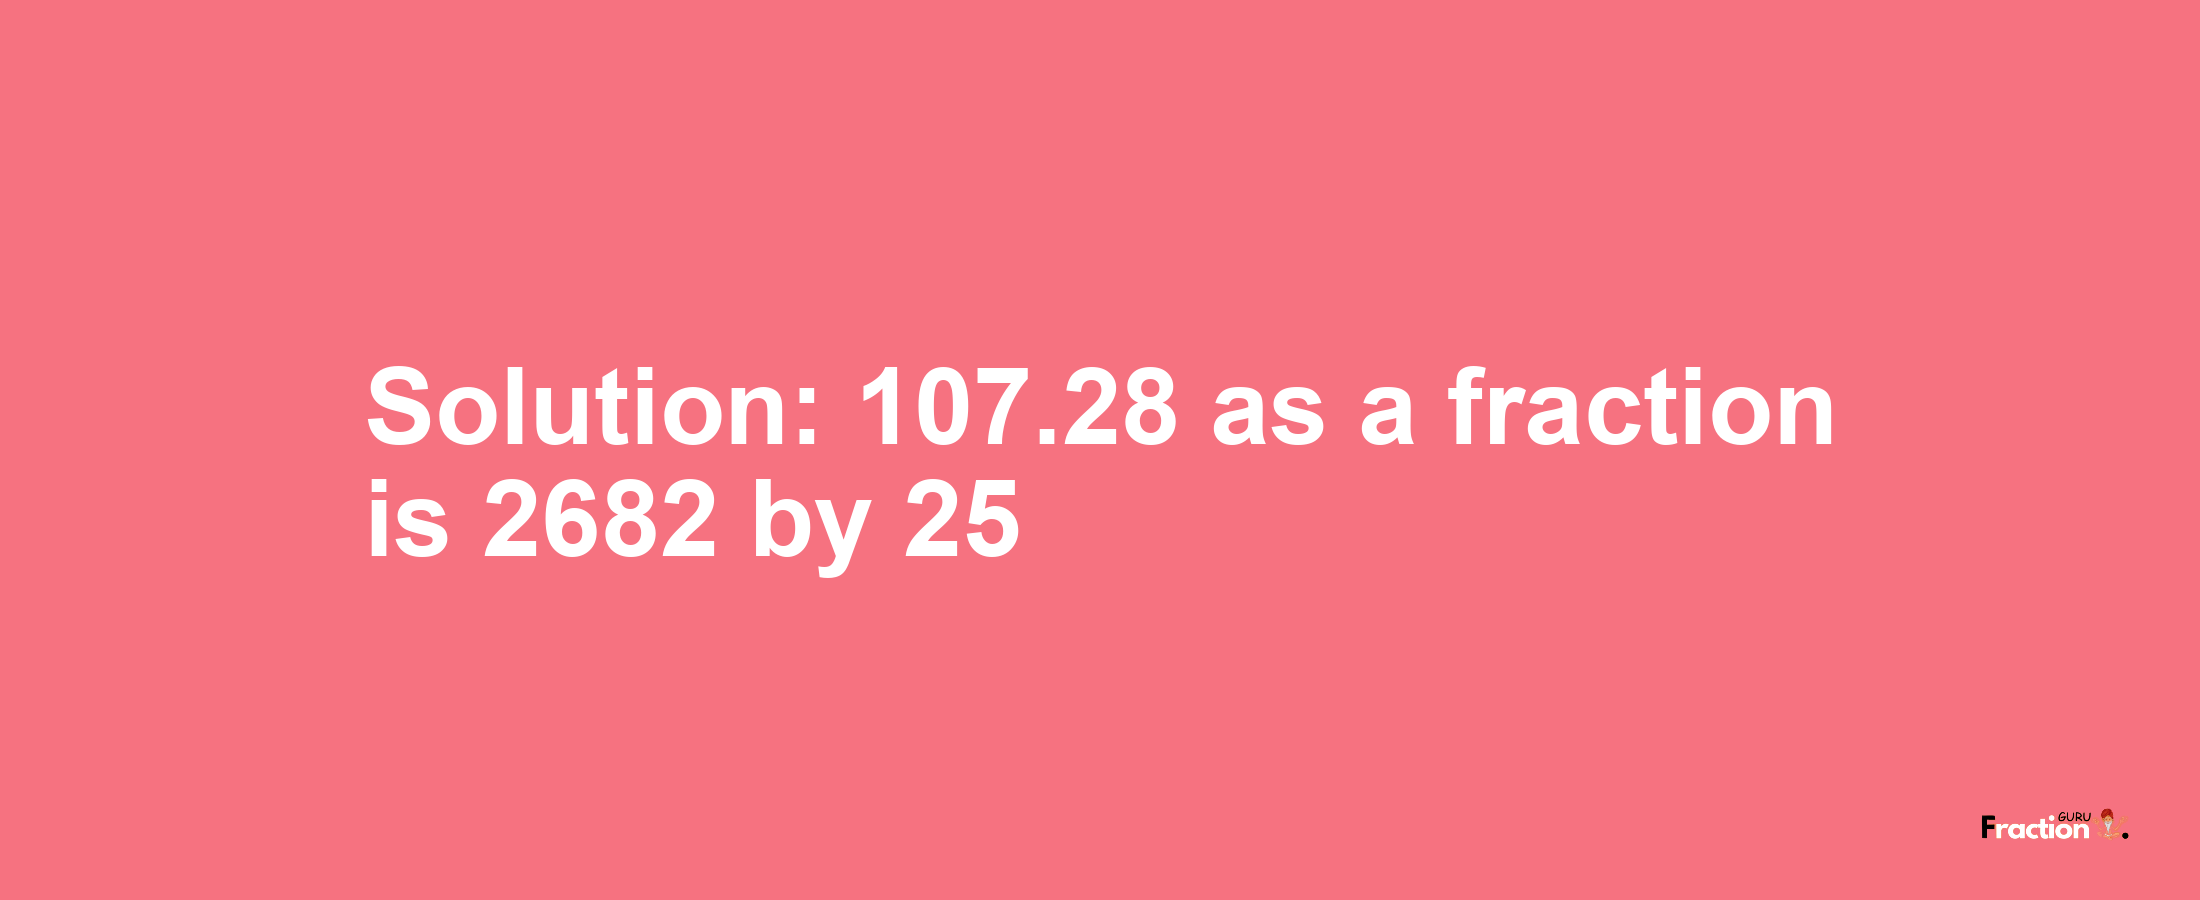 Solution:107.28 as a fraction is 2682/25